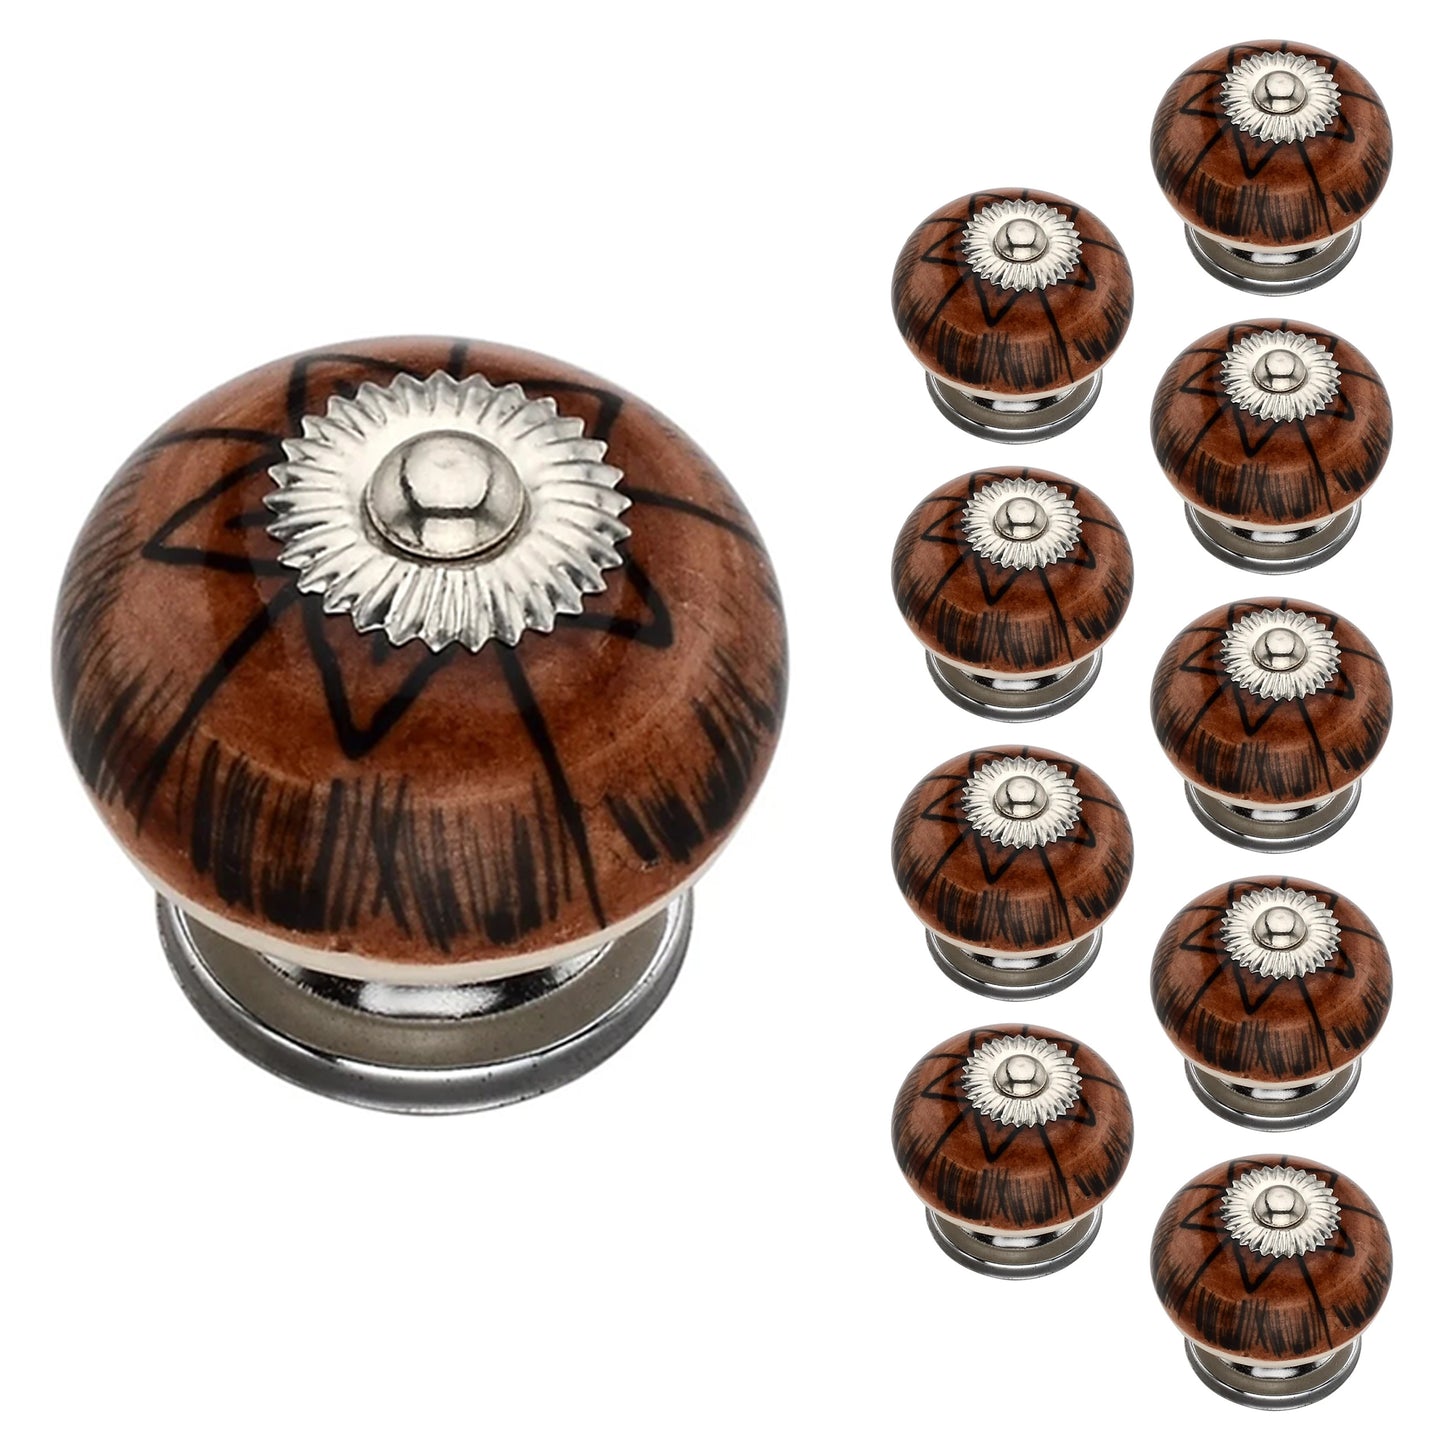 Mascot Hardware Calico 1-4/7 in. Brown & Yellow Drawer Cabinet Knob